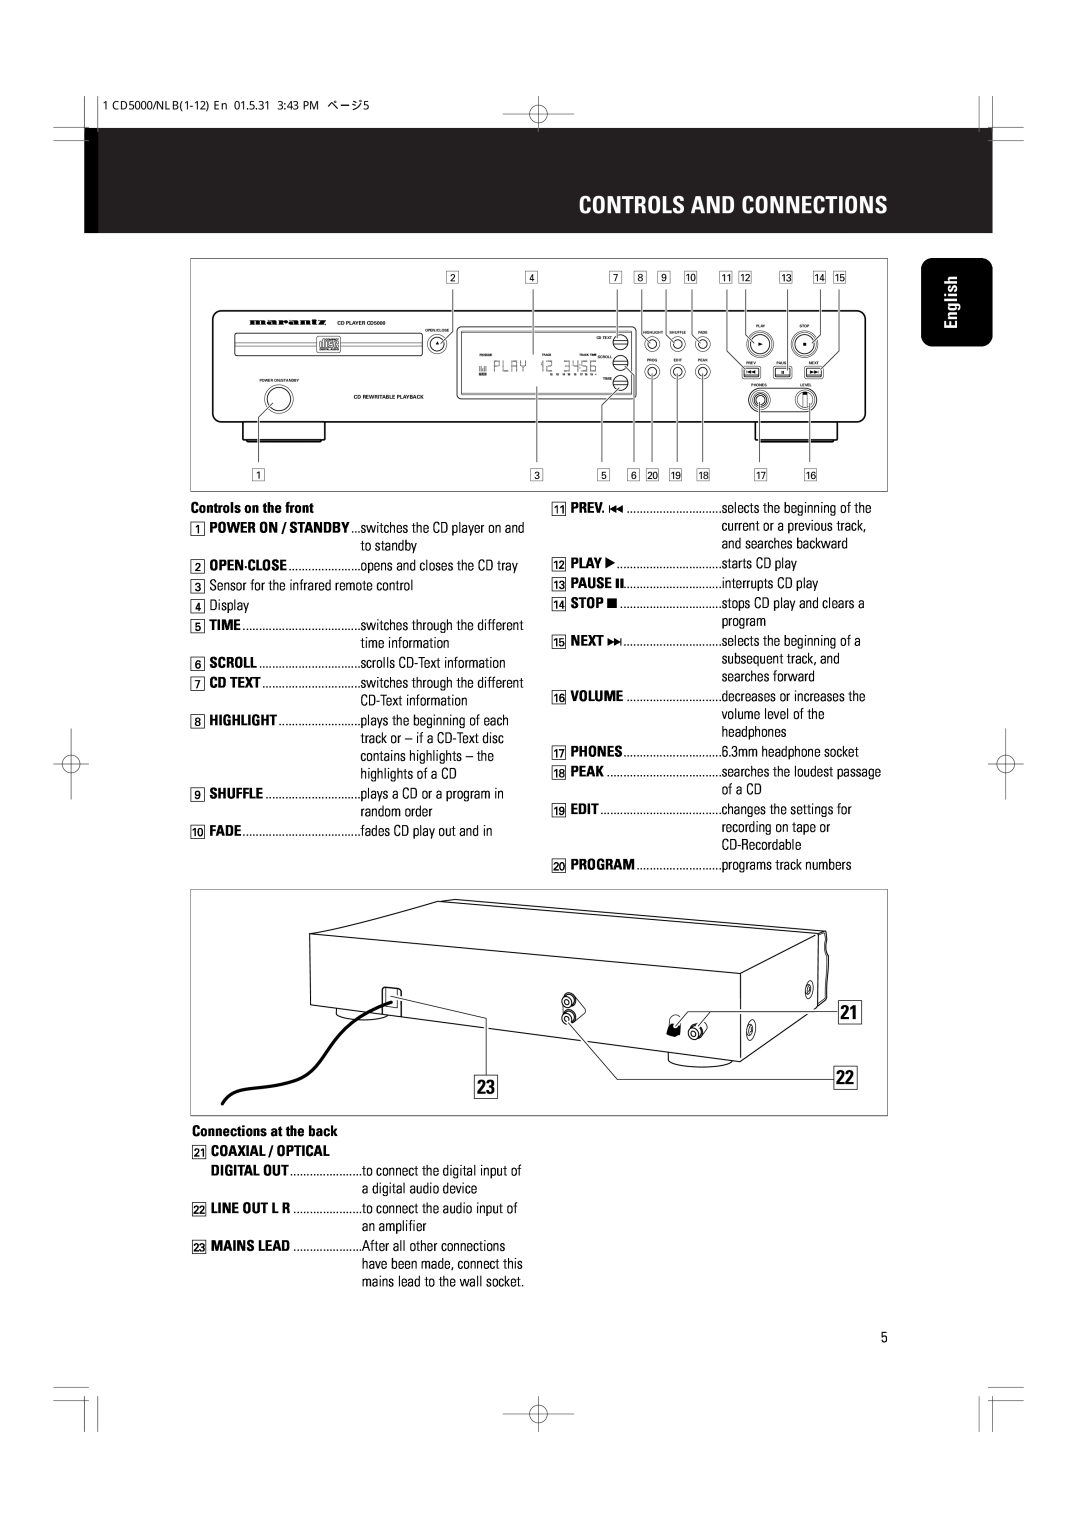 Philips CD5000 manual Controls And Connections, English, Controls on the front, Connections at the back ¡COAXIAL / OPTICAL 